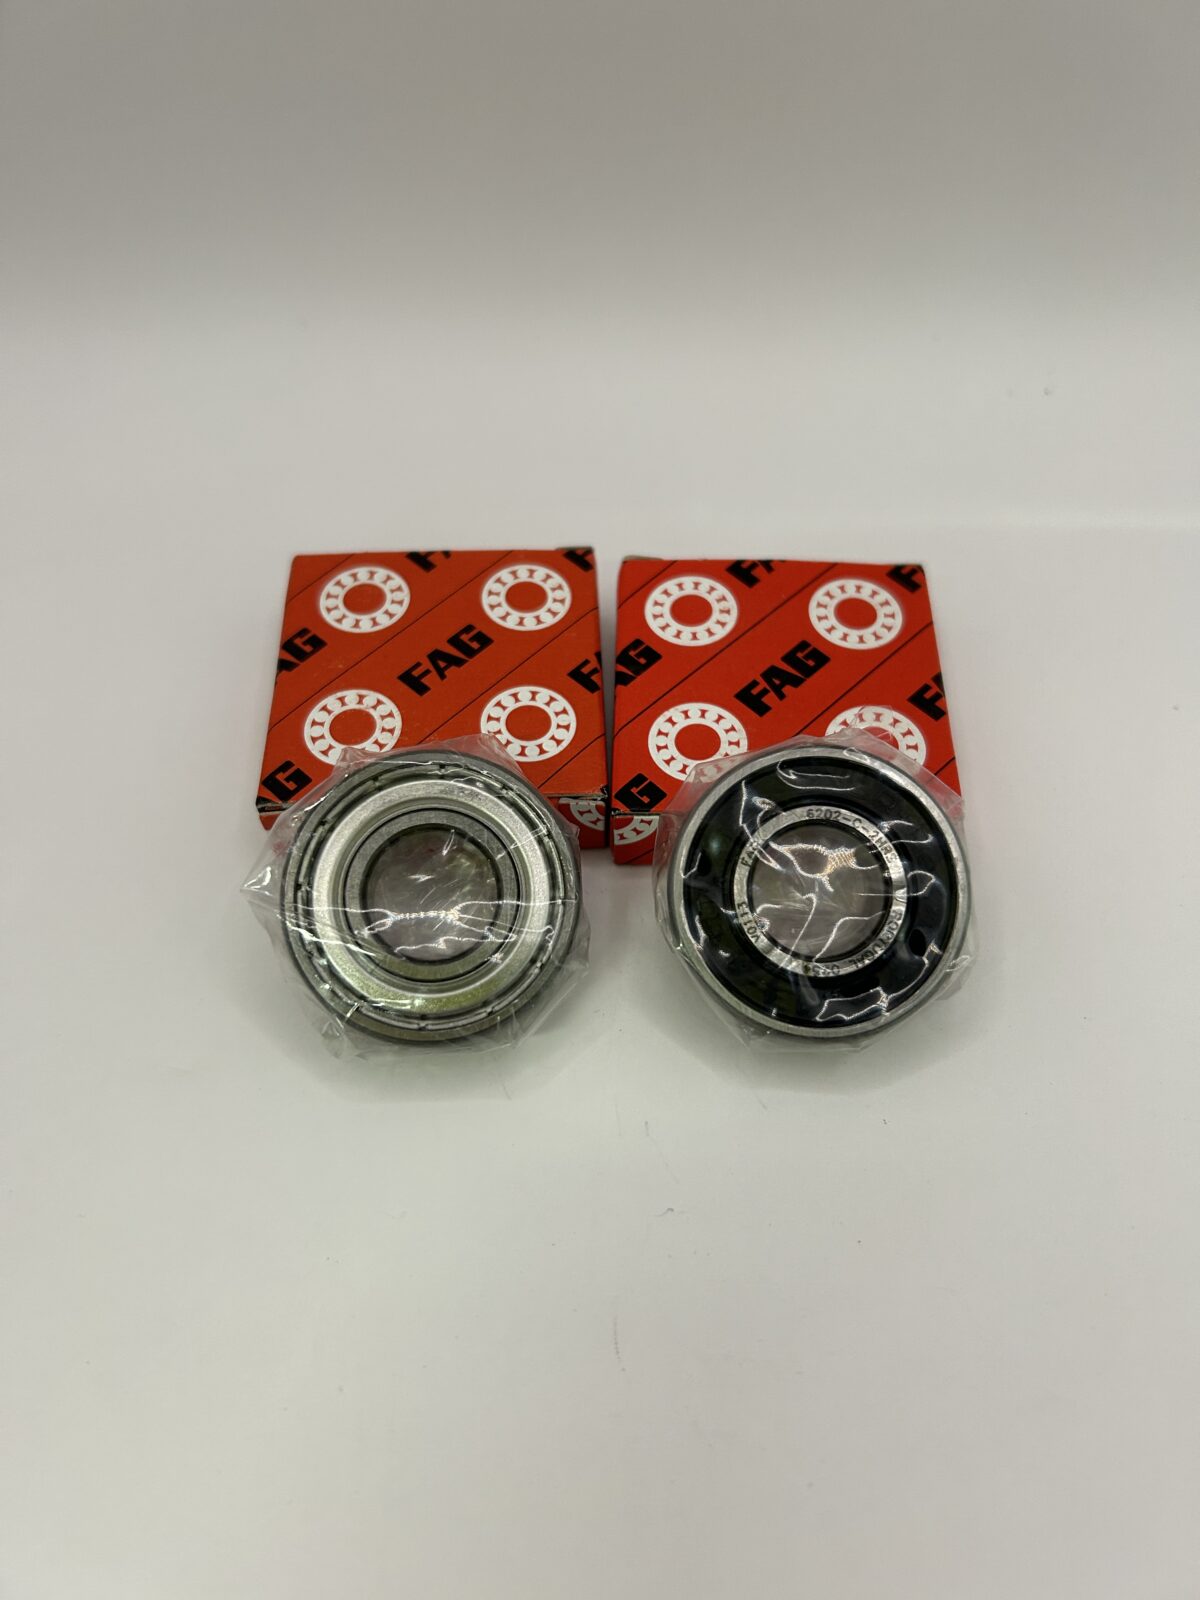 MP106(a) Vittorazi Bearings for Drum Pinion Moster 185 Factory R